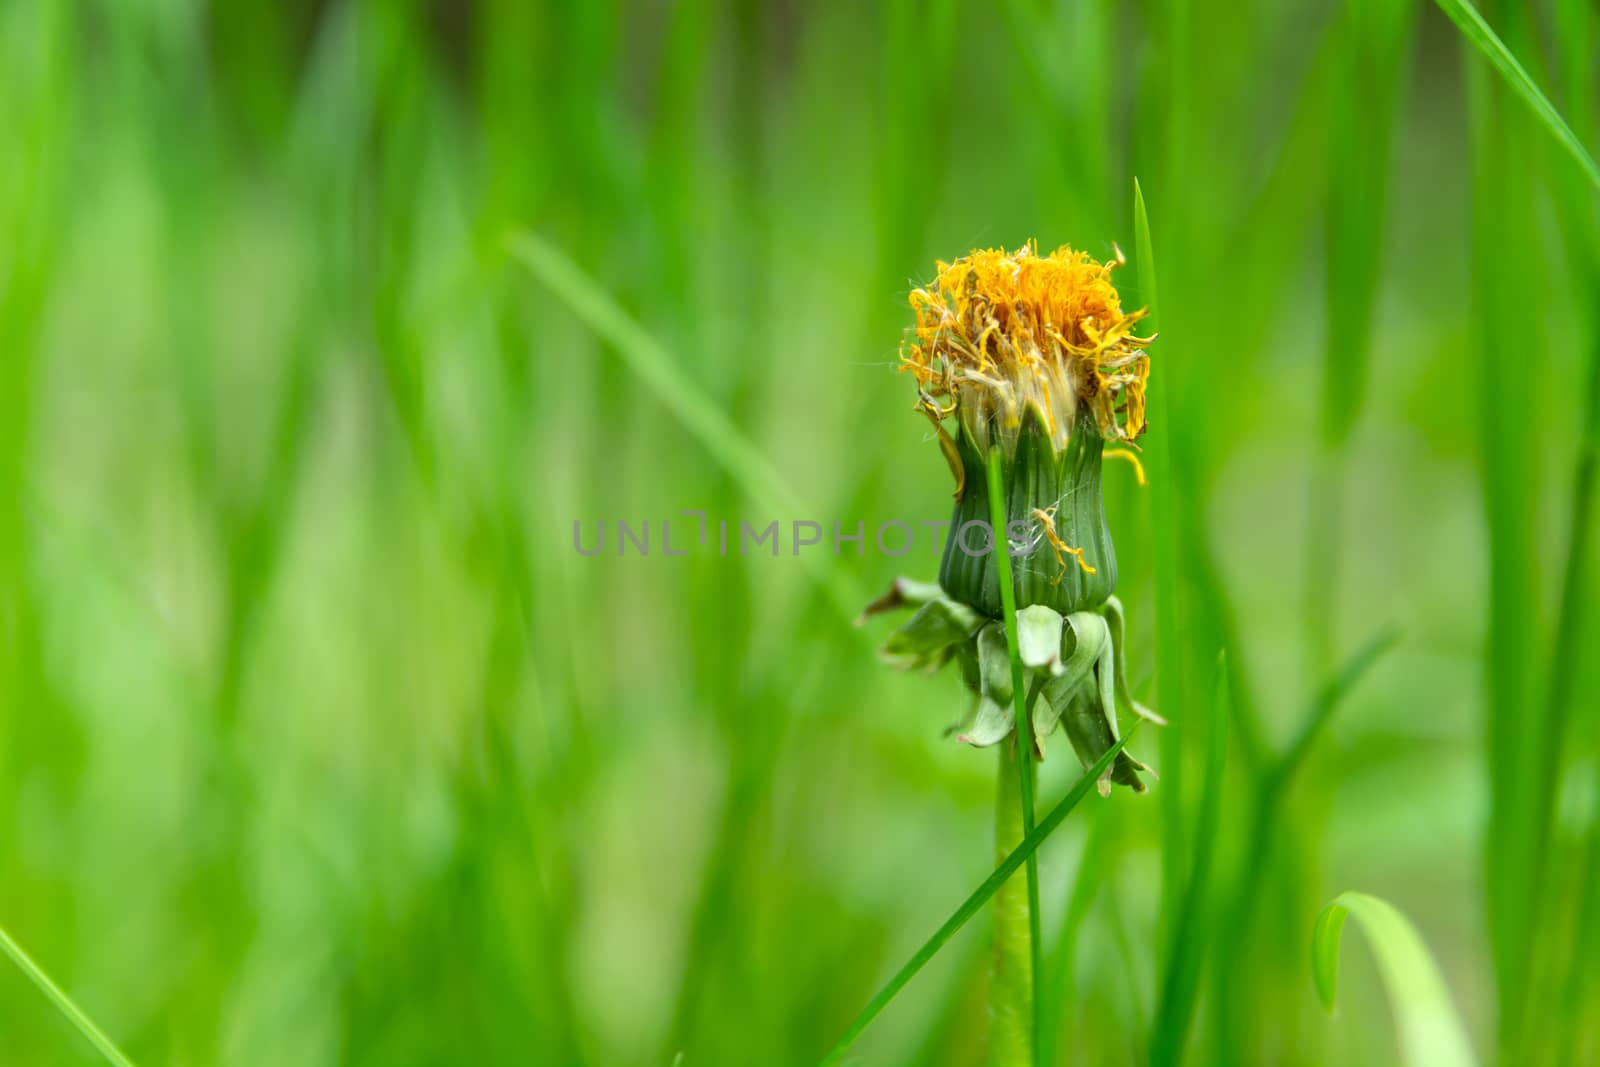 Faded flower of a dandelion against a background of green grass by darekb22